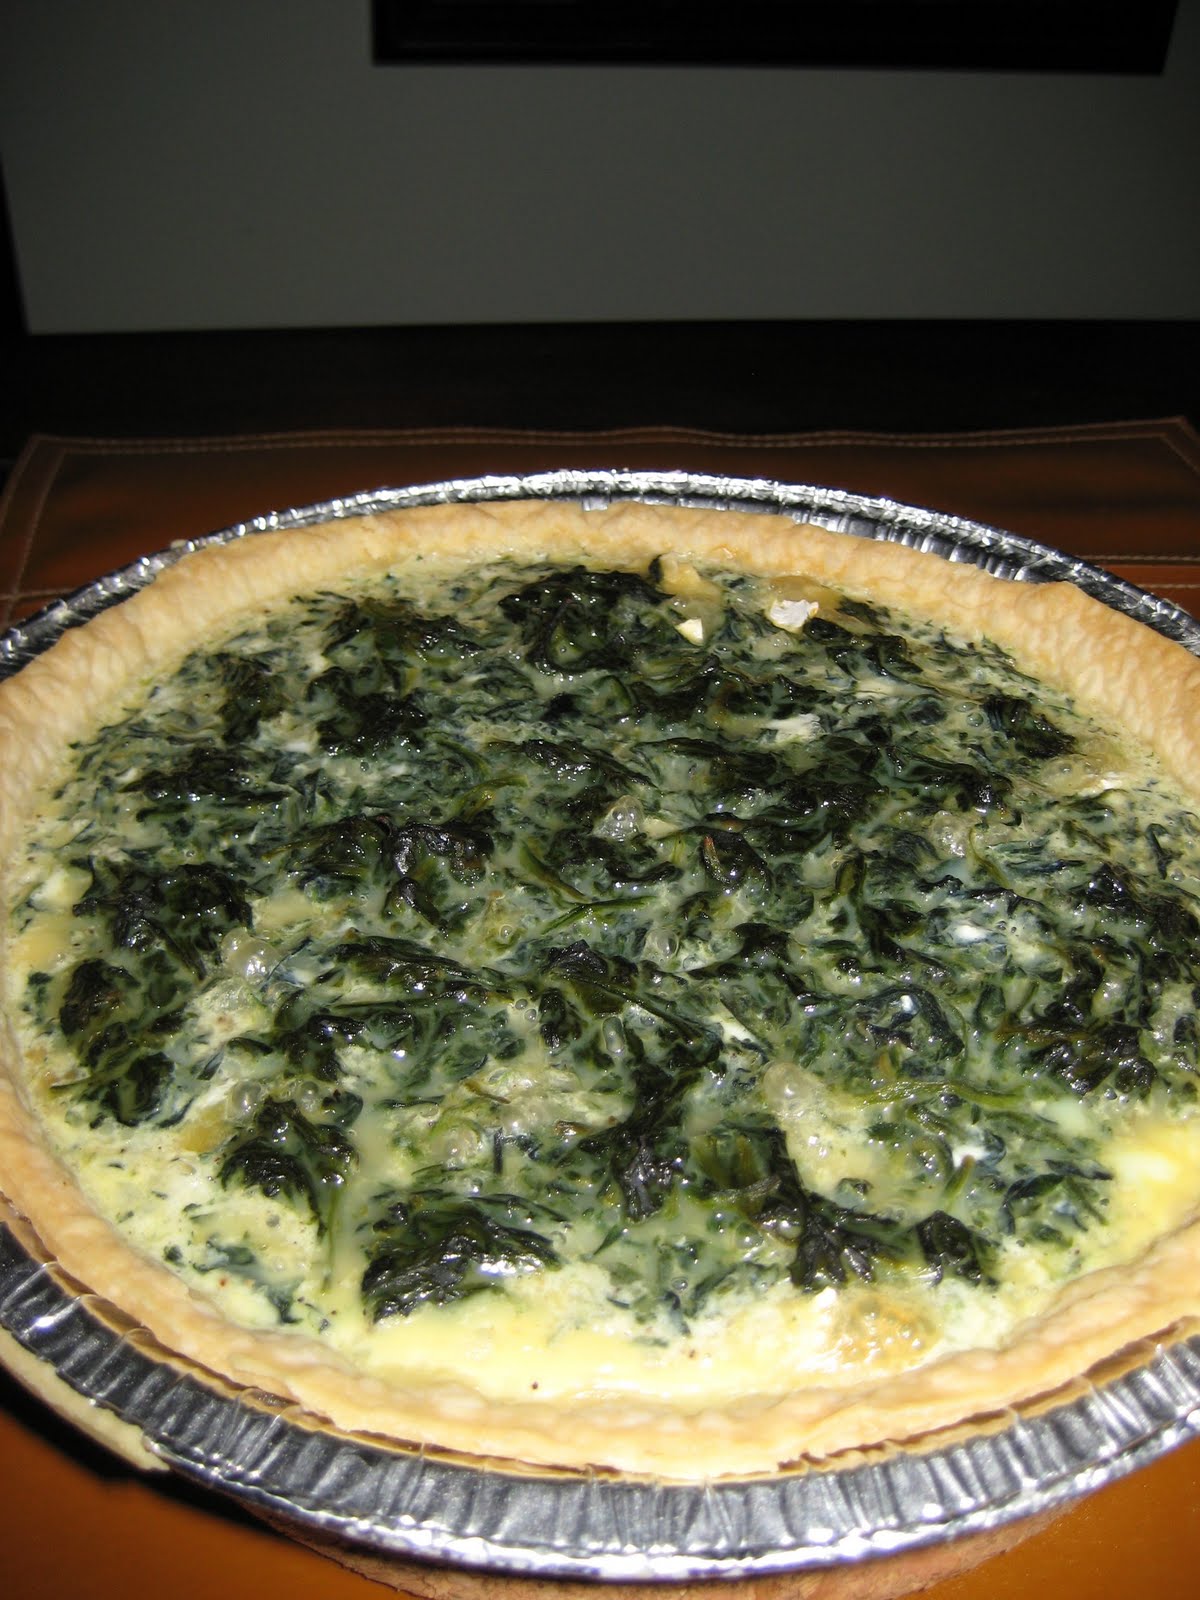 Recipes: Spinach Camembert Caramelized Onion Quiche